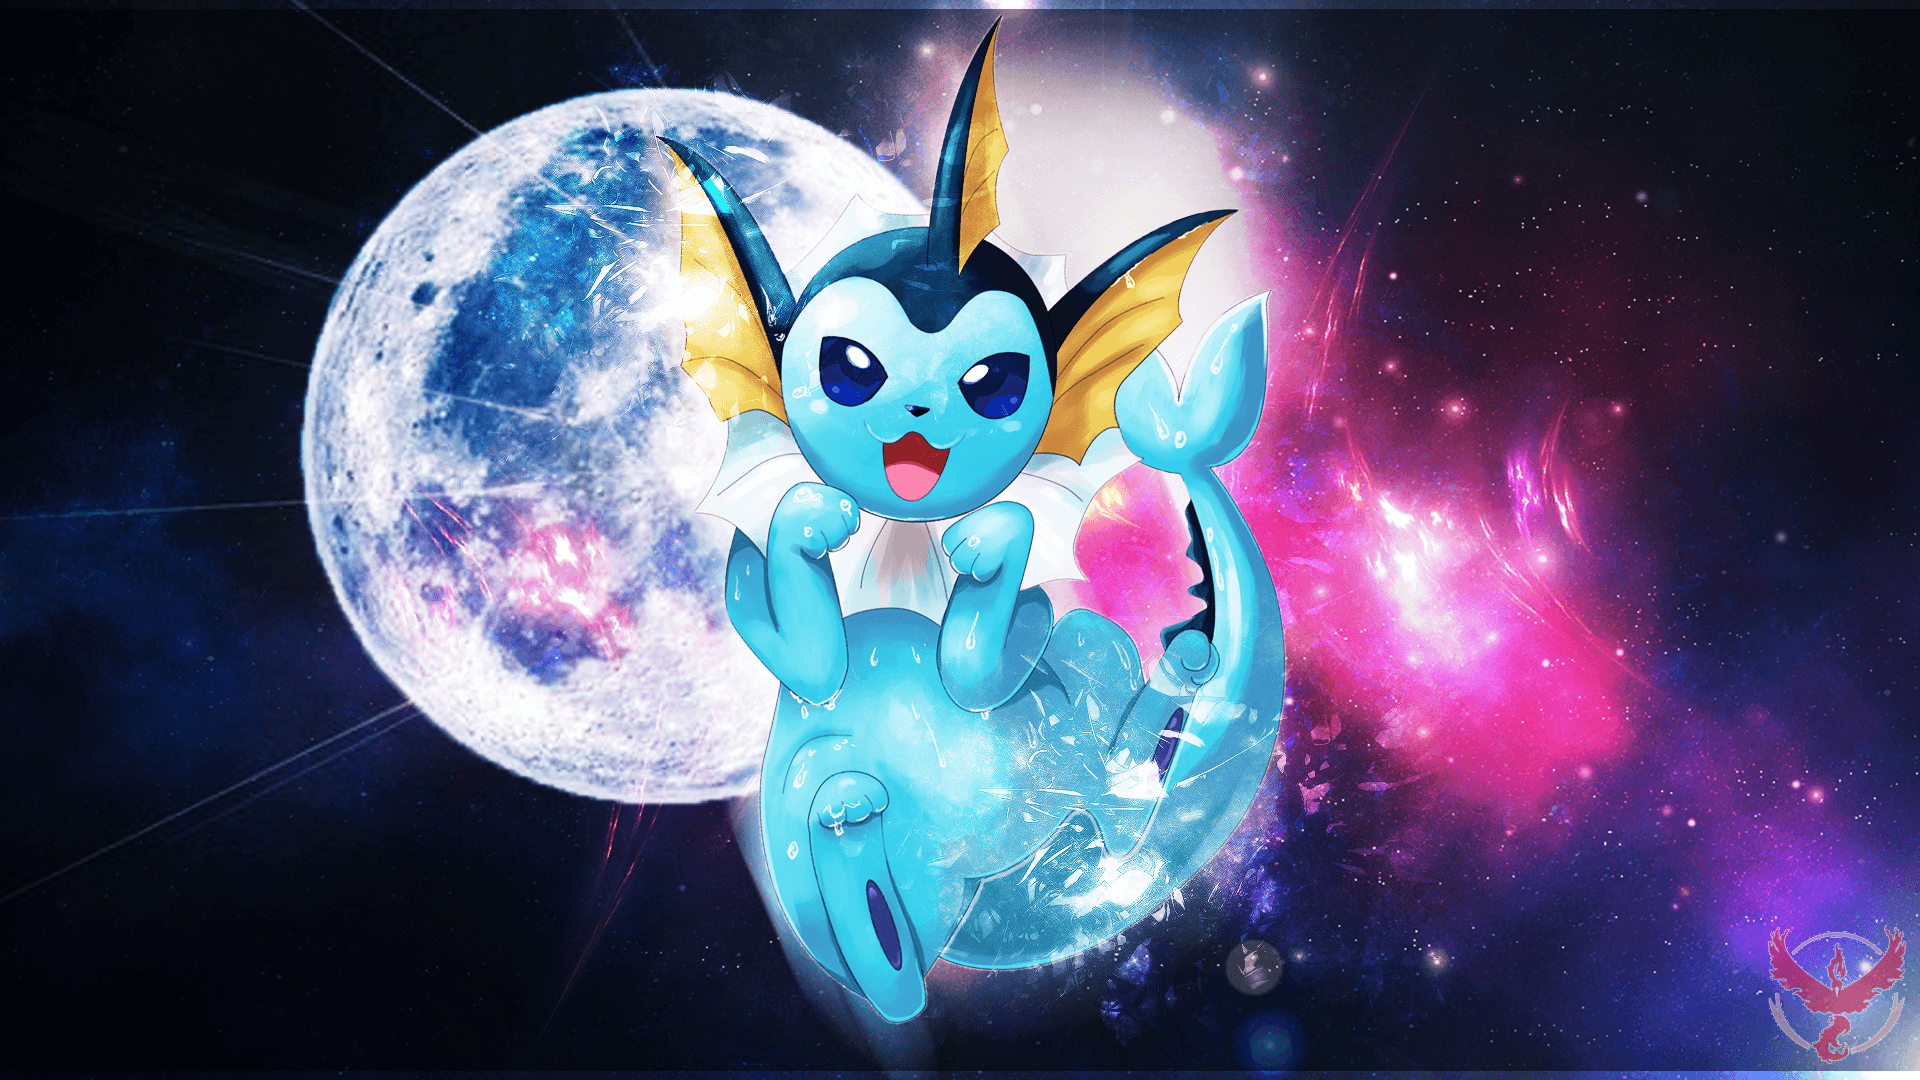 Vaporeon Wallpapers by nubcakemew.